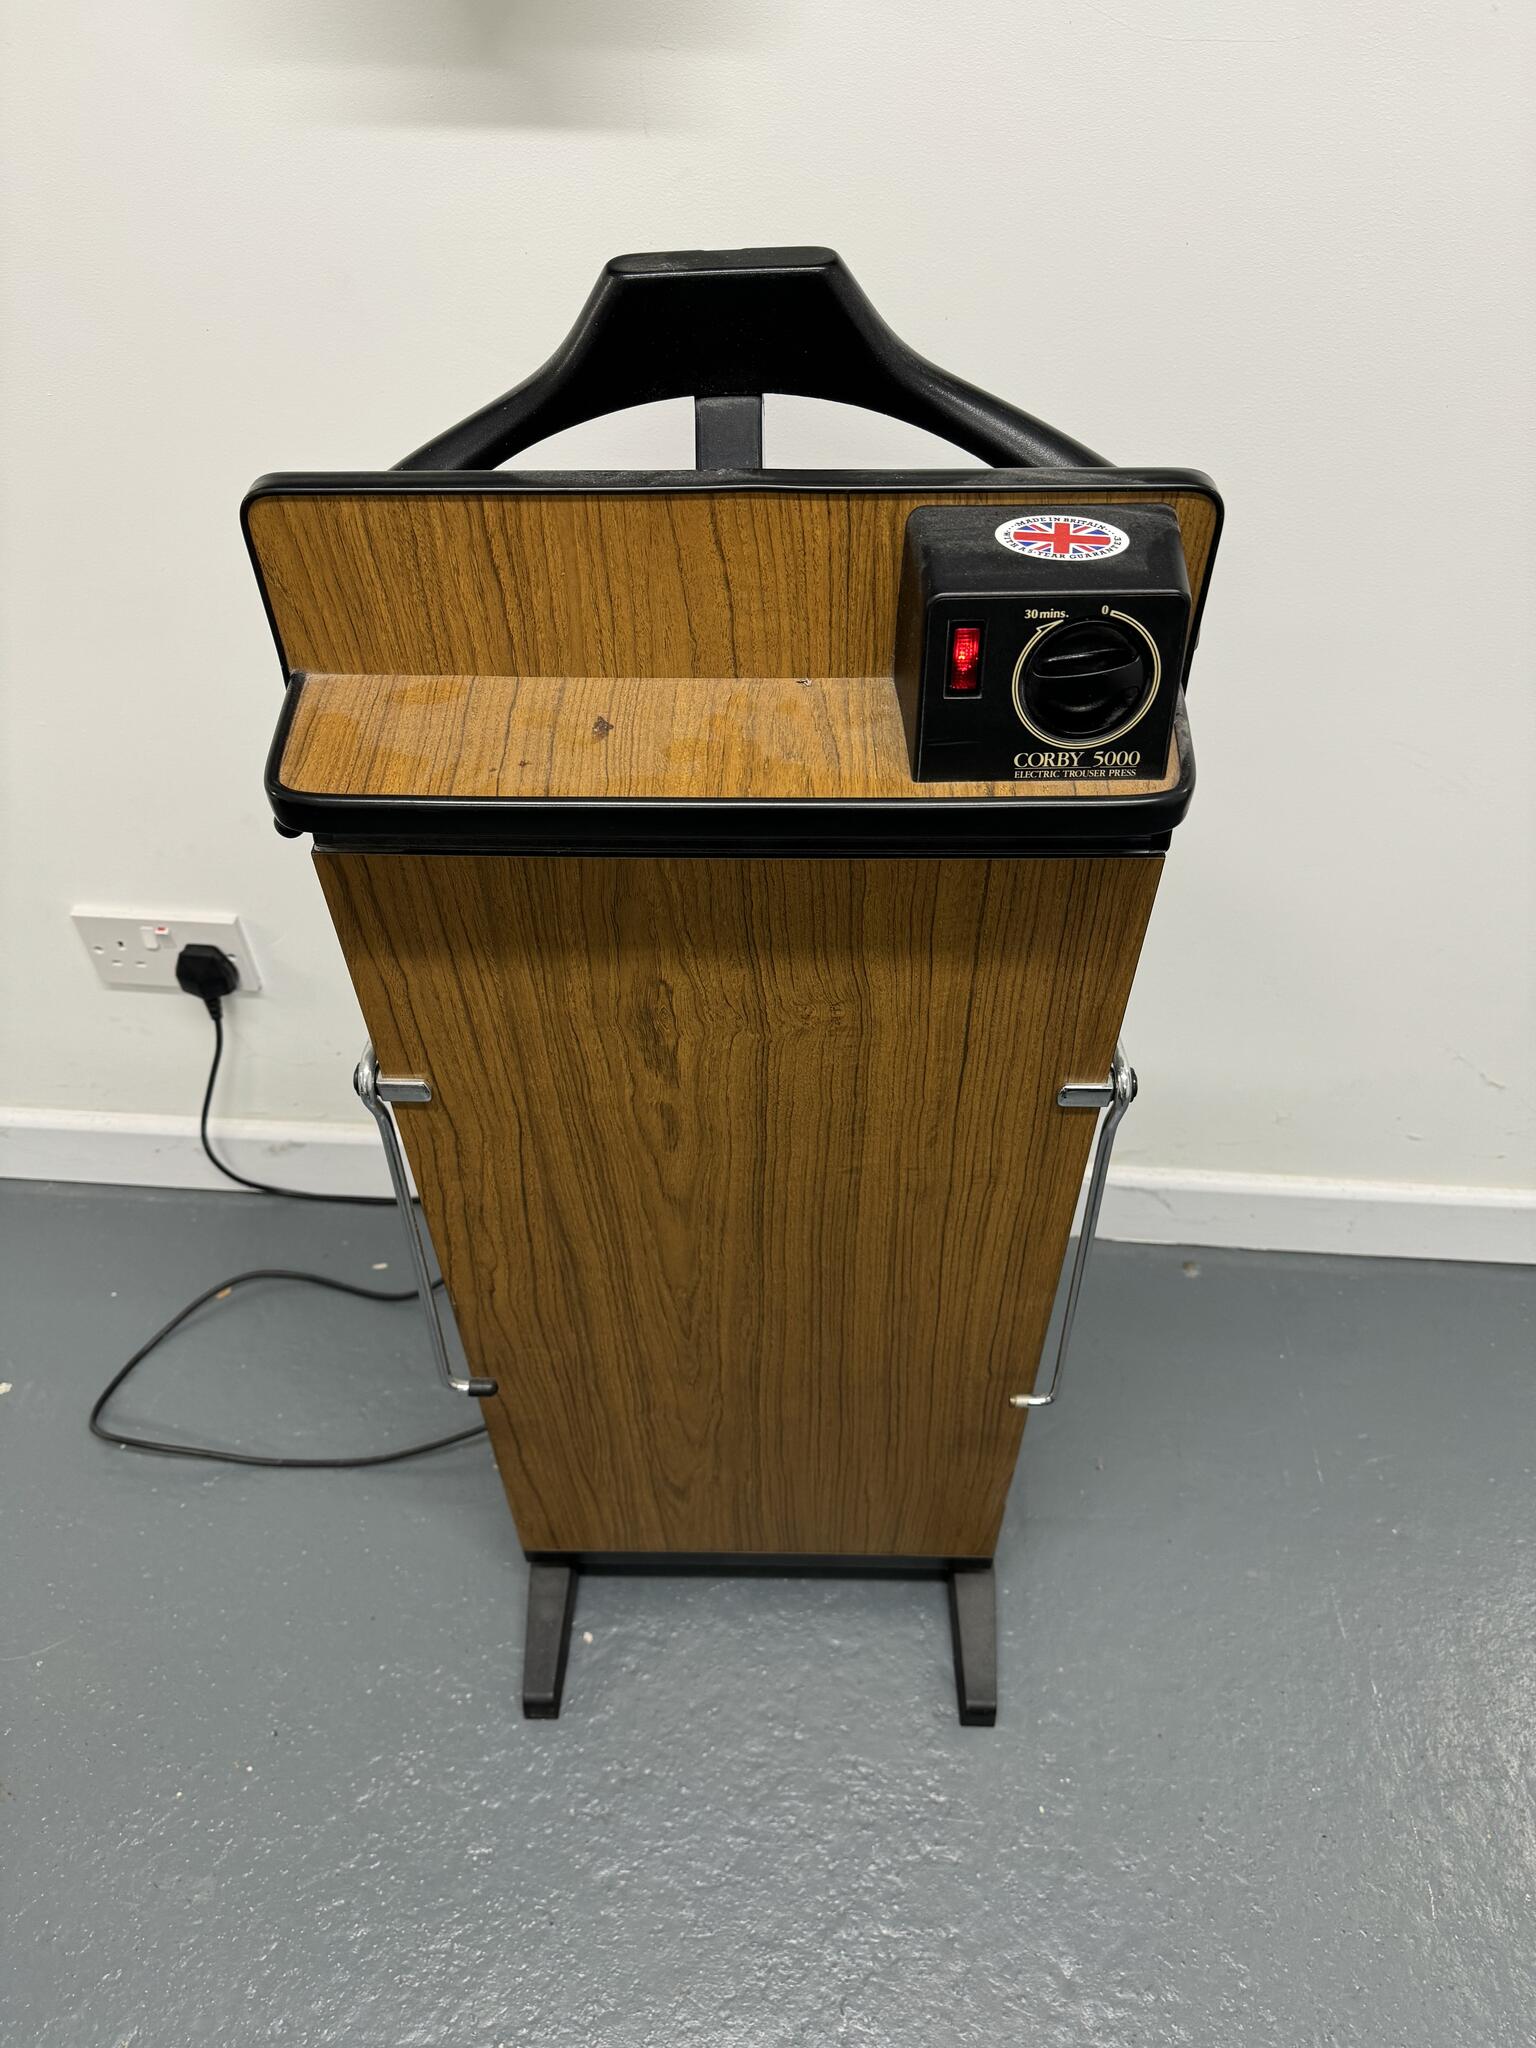 Brookstone Mahogany Pants Press for Sale in Mission Viejo, CA - OfferUp